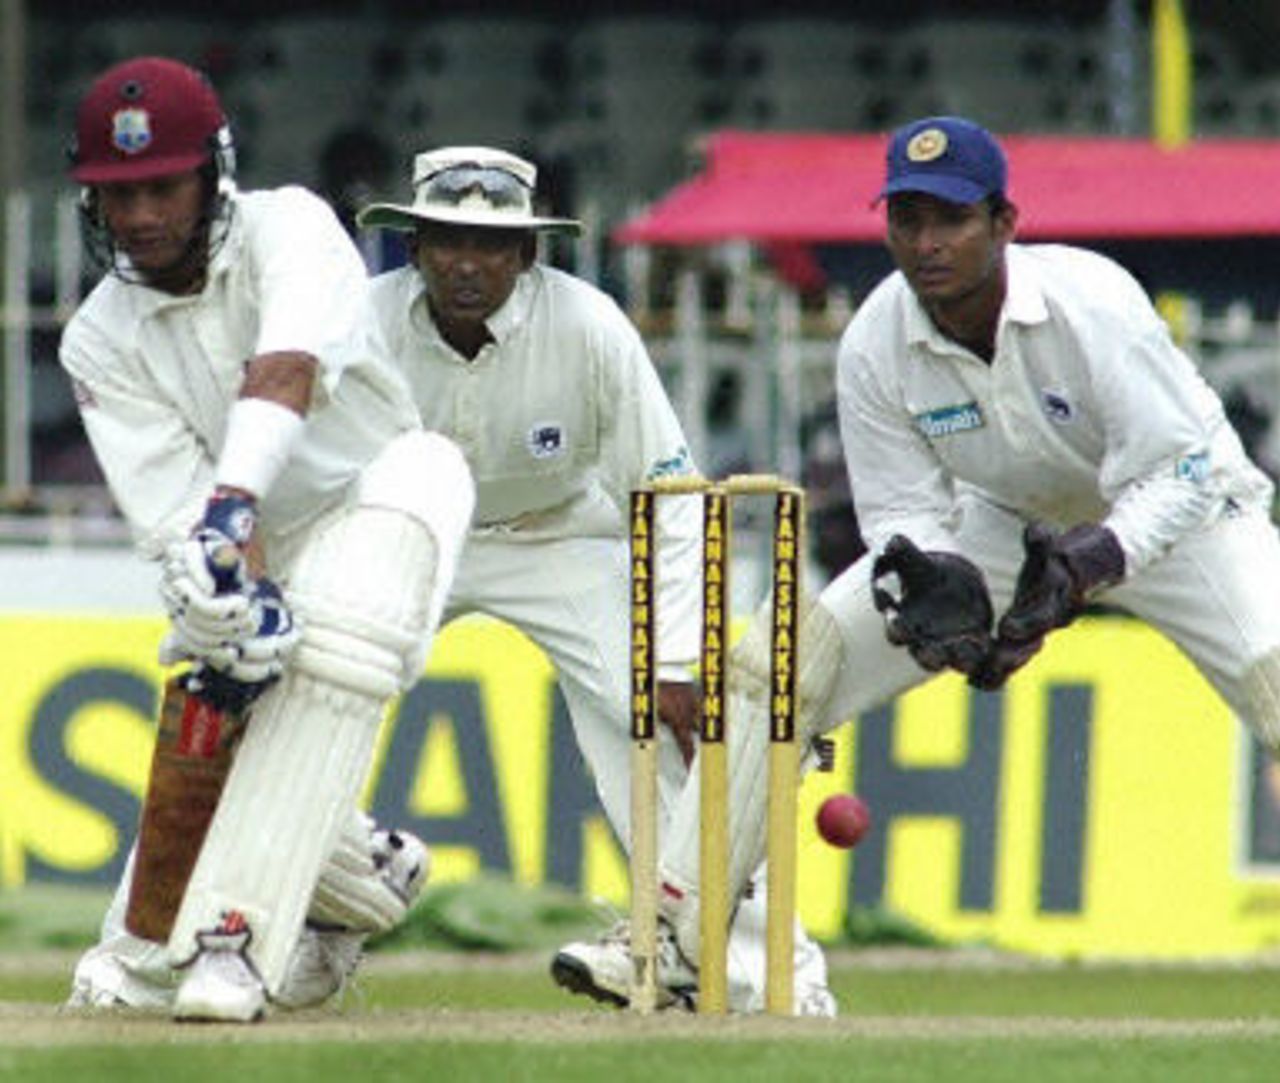 Ramnaresh Sarwan defends a ball as Sangakkara and Jayawardane looks on during the first day of thirdTest match between Sri Lanka and West Indies, SSC Colombo